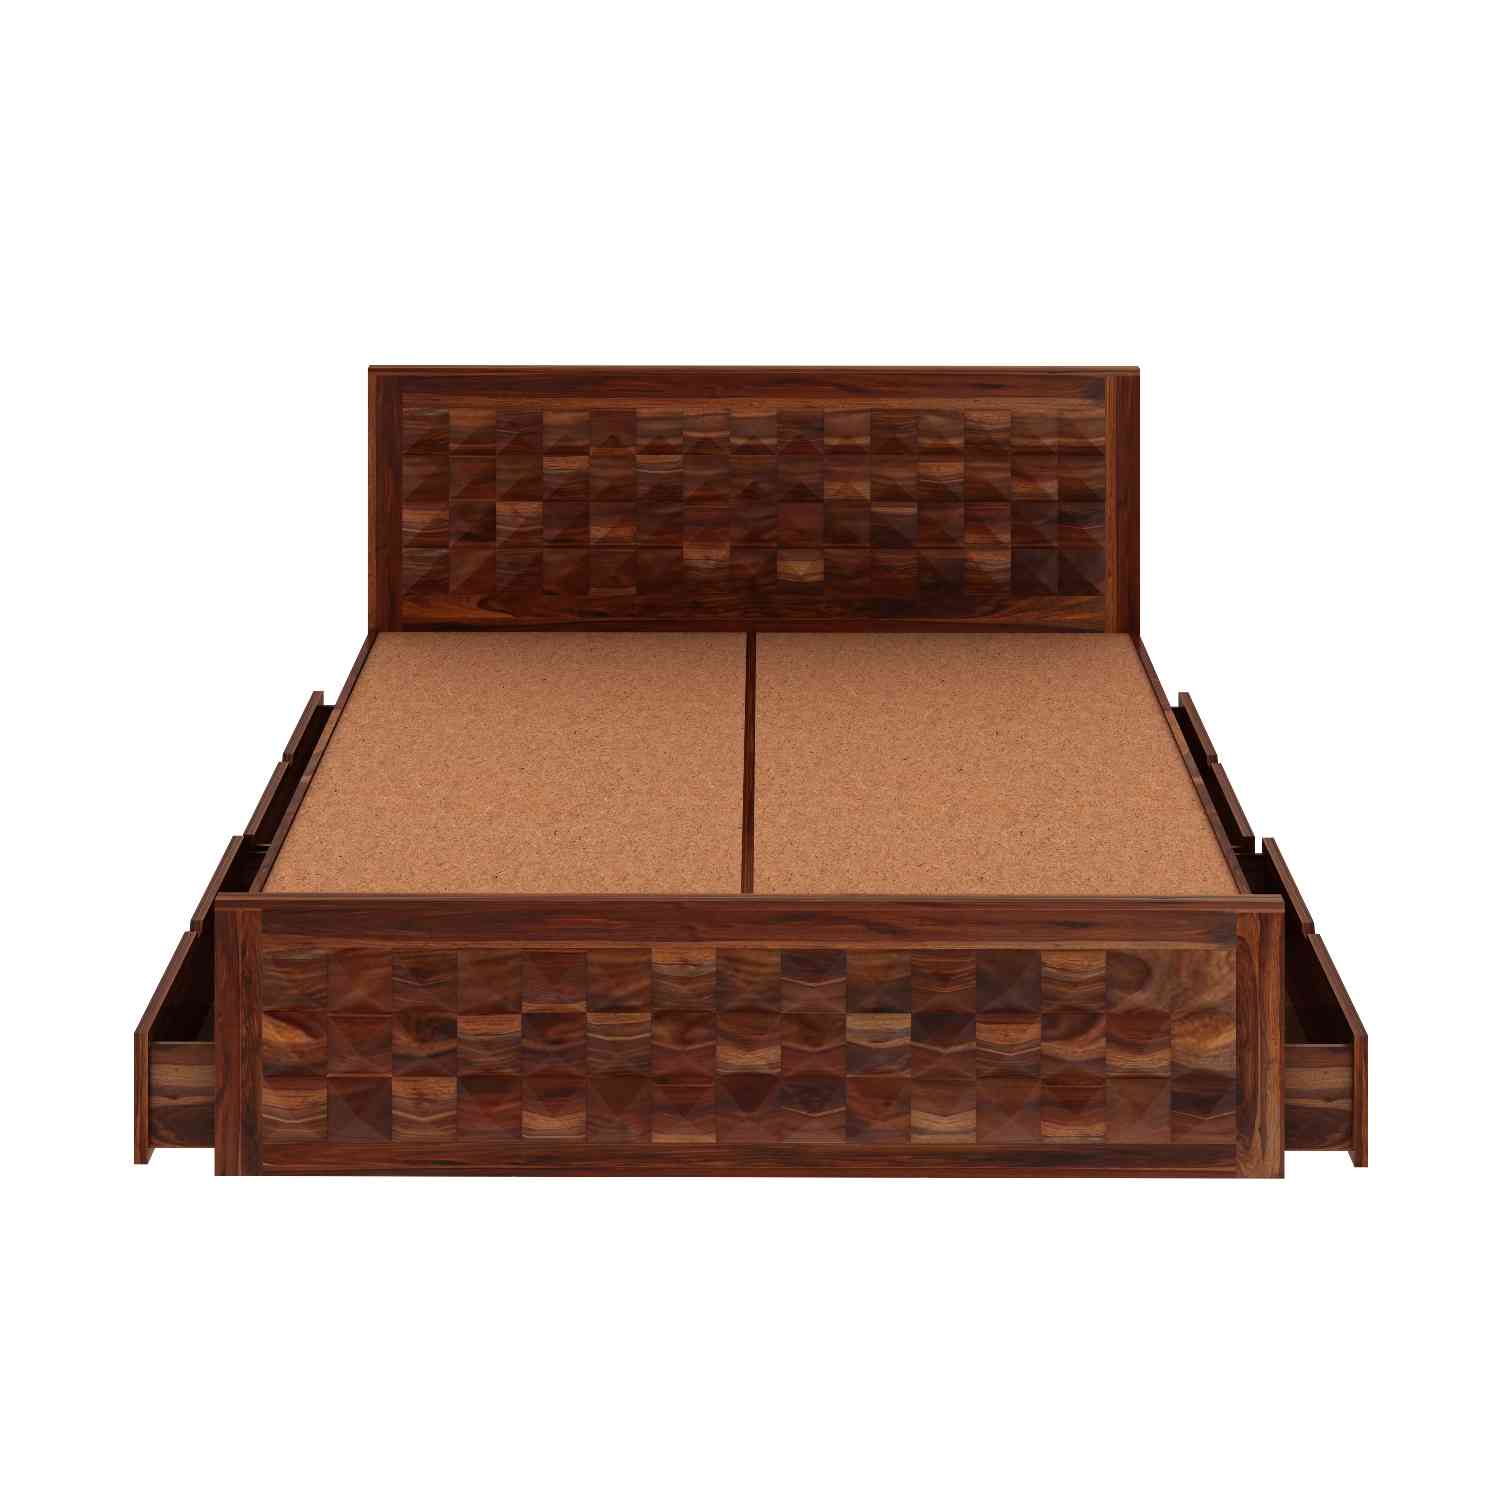 Sofia Solid Sheesham Wood Bed With Four Drawers (King Size, Natural Finish)